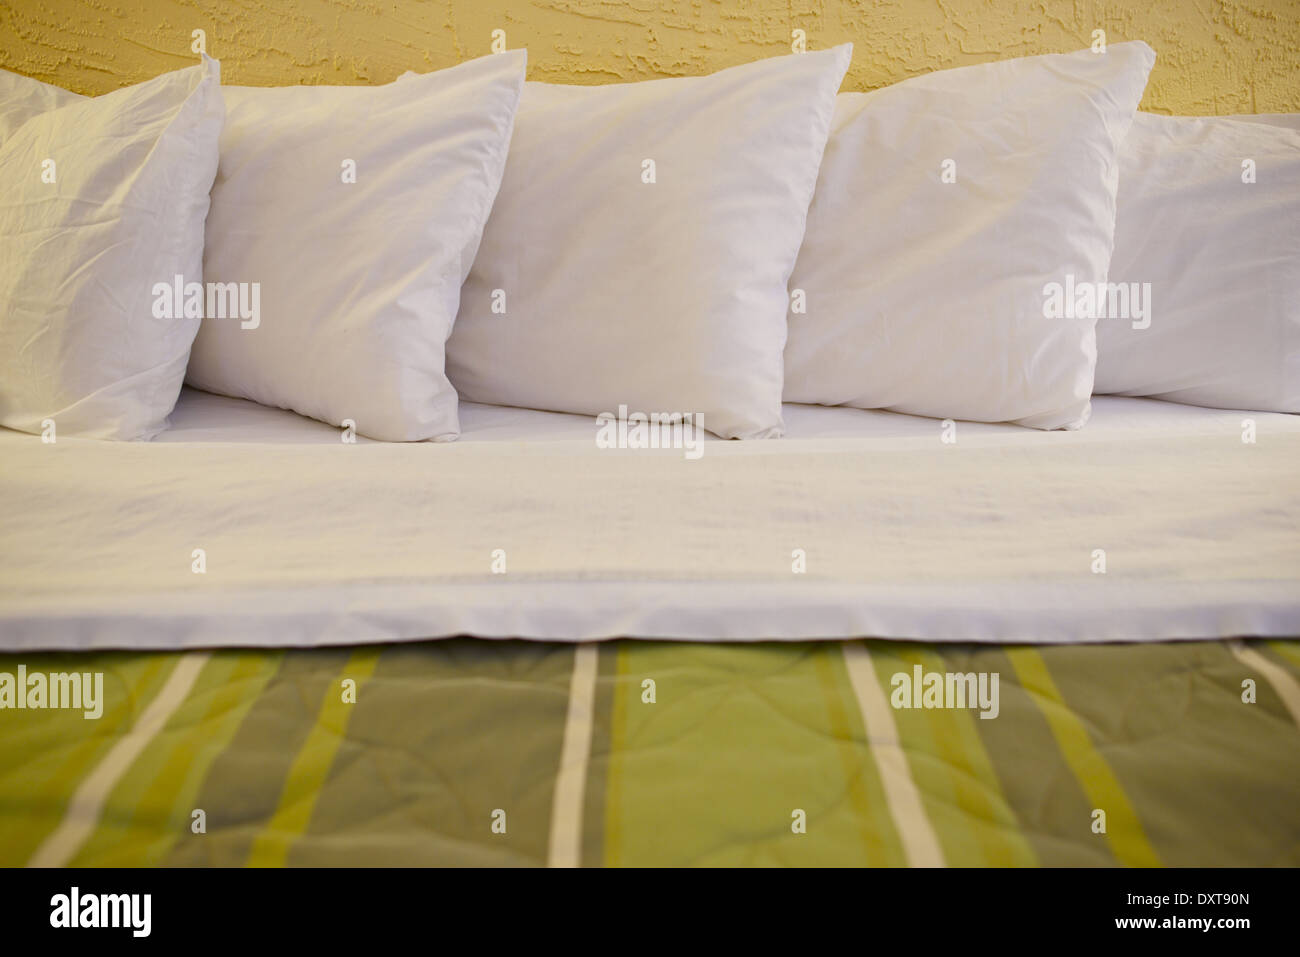 https://c8.alamy.com/comp/DXT90N/king-size-bed-and-five-pillows-closeup-household-photo-collection-DXT90N.jpg